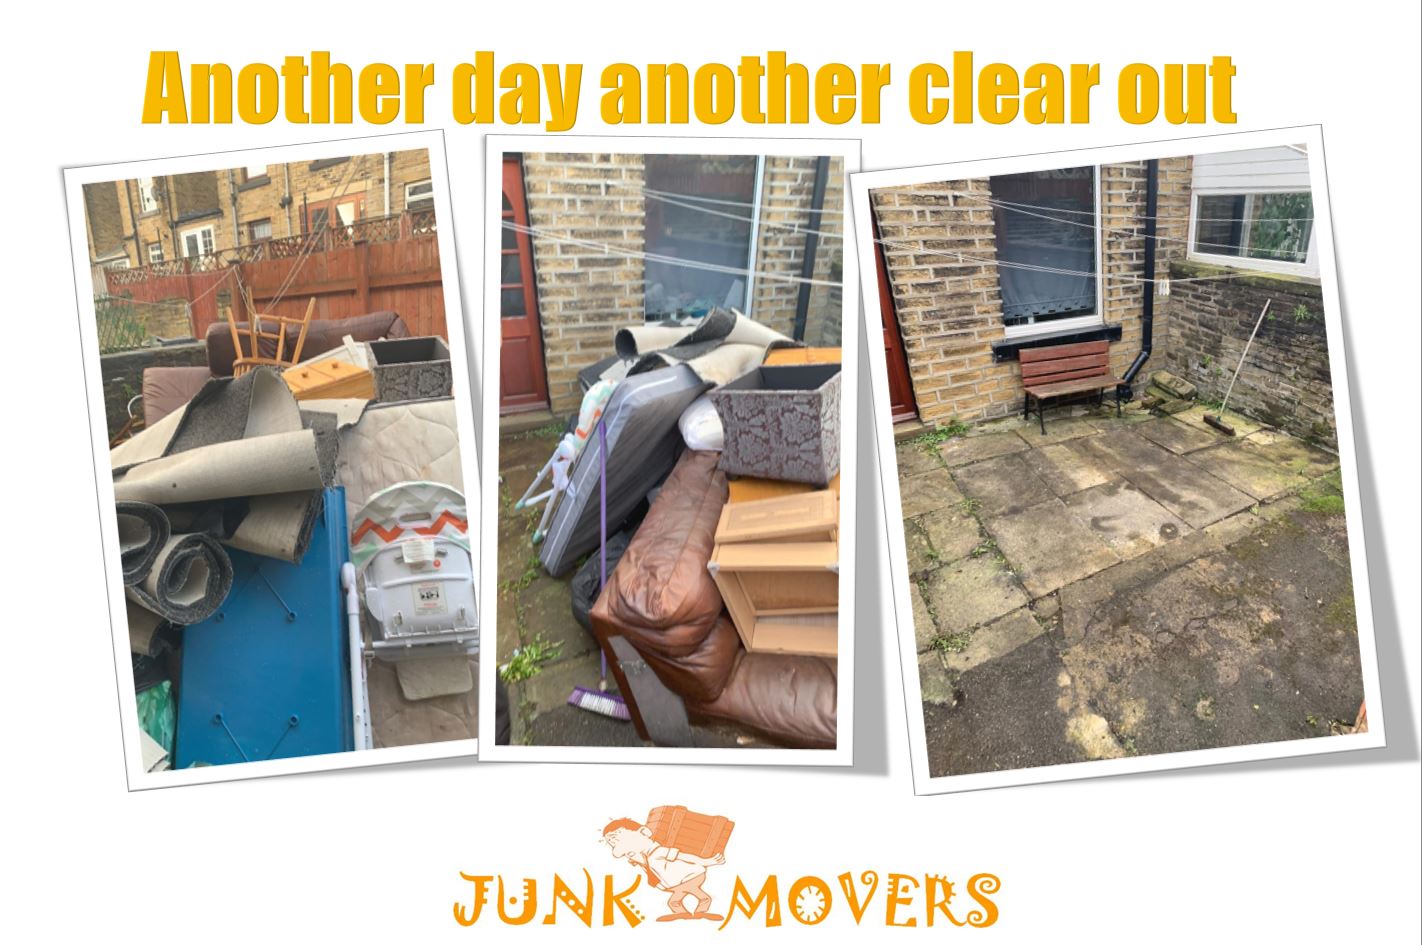 Junk Collections Rochdale, Junk Movers West Yorkshire Ltd